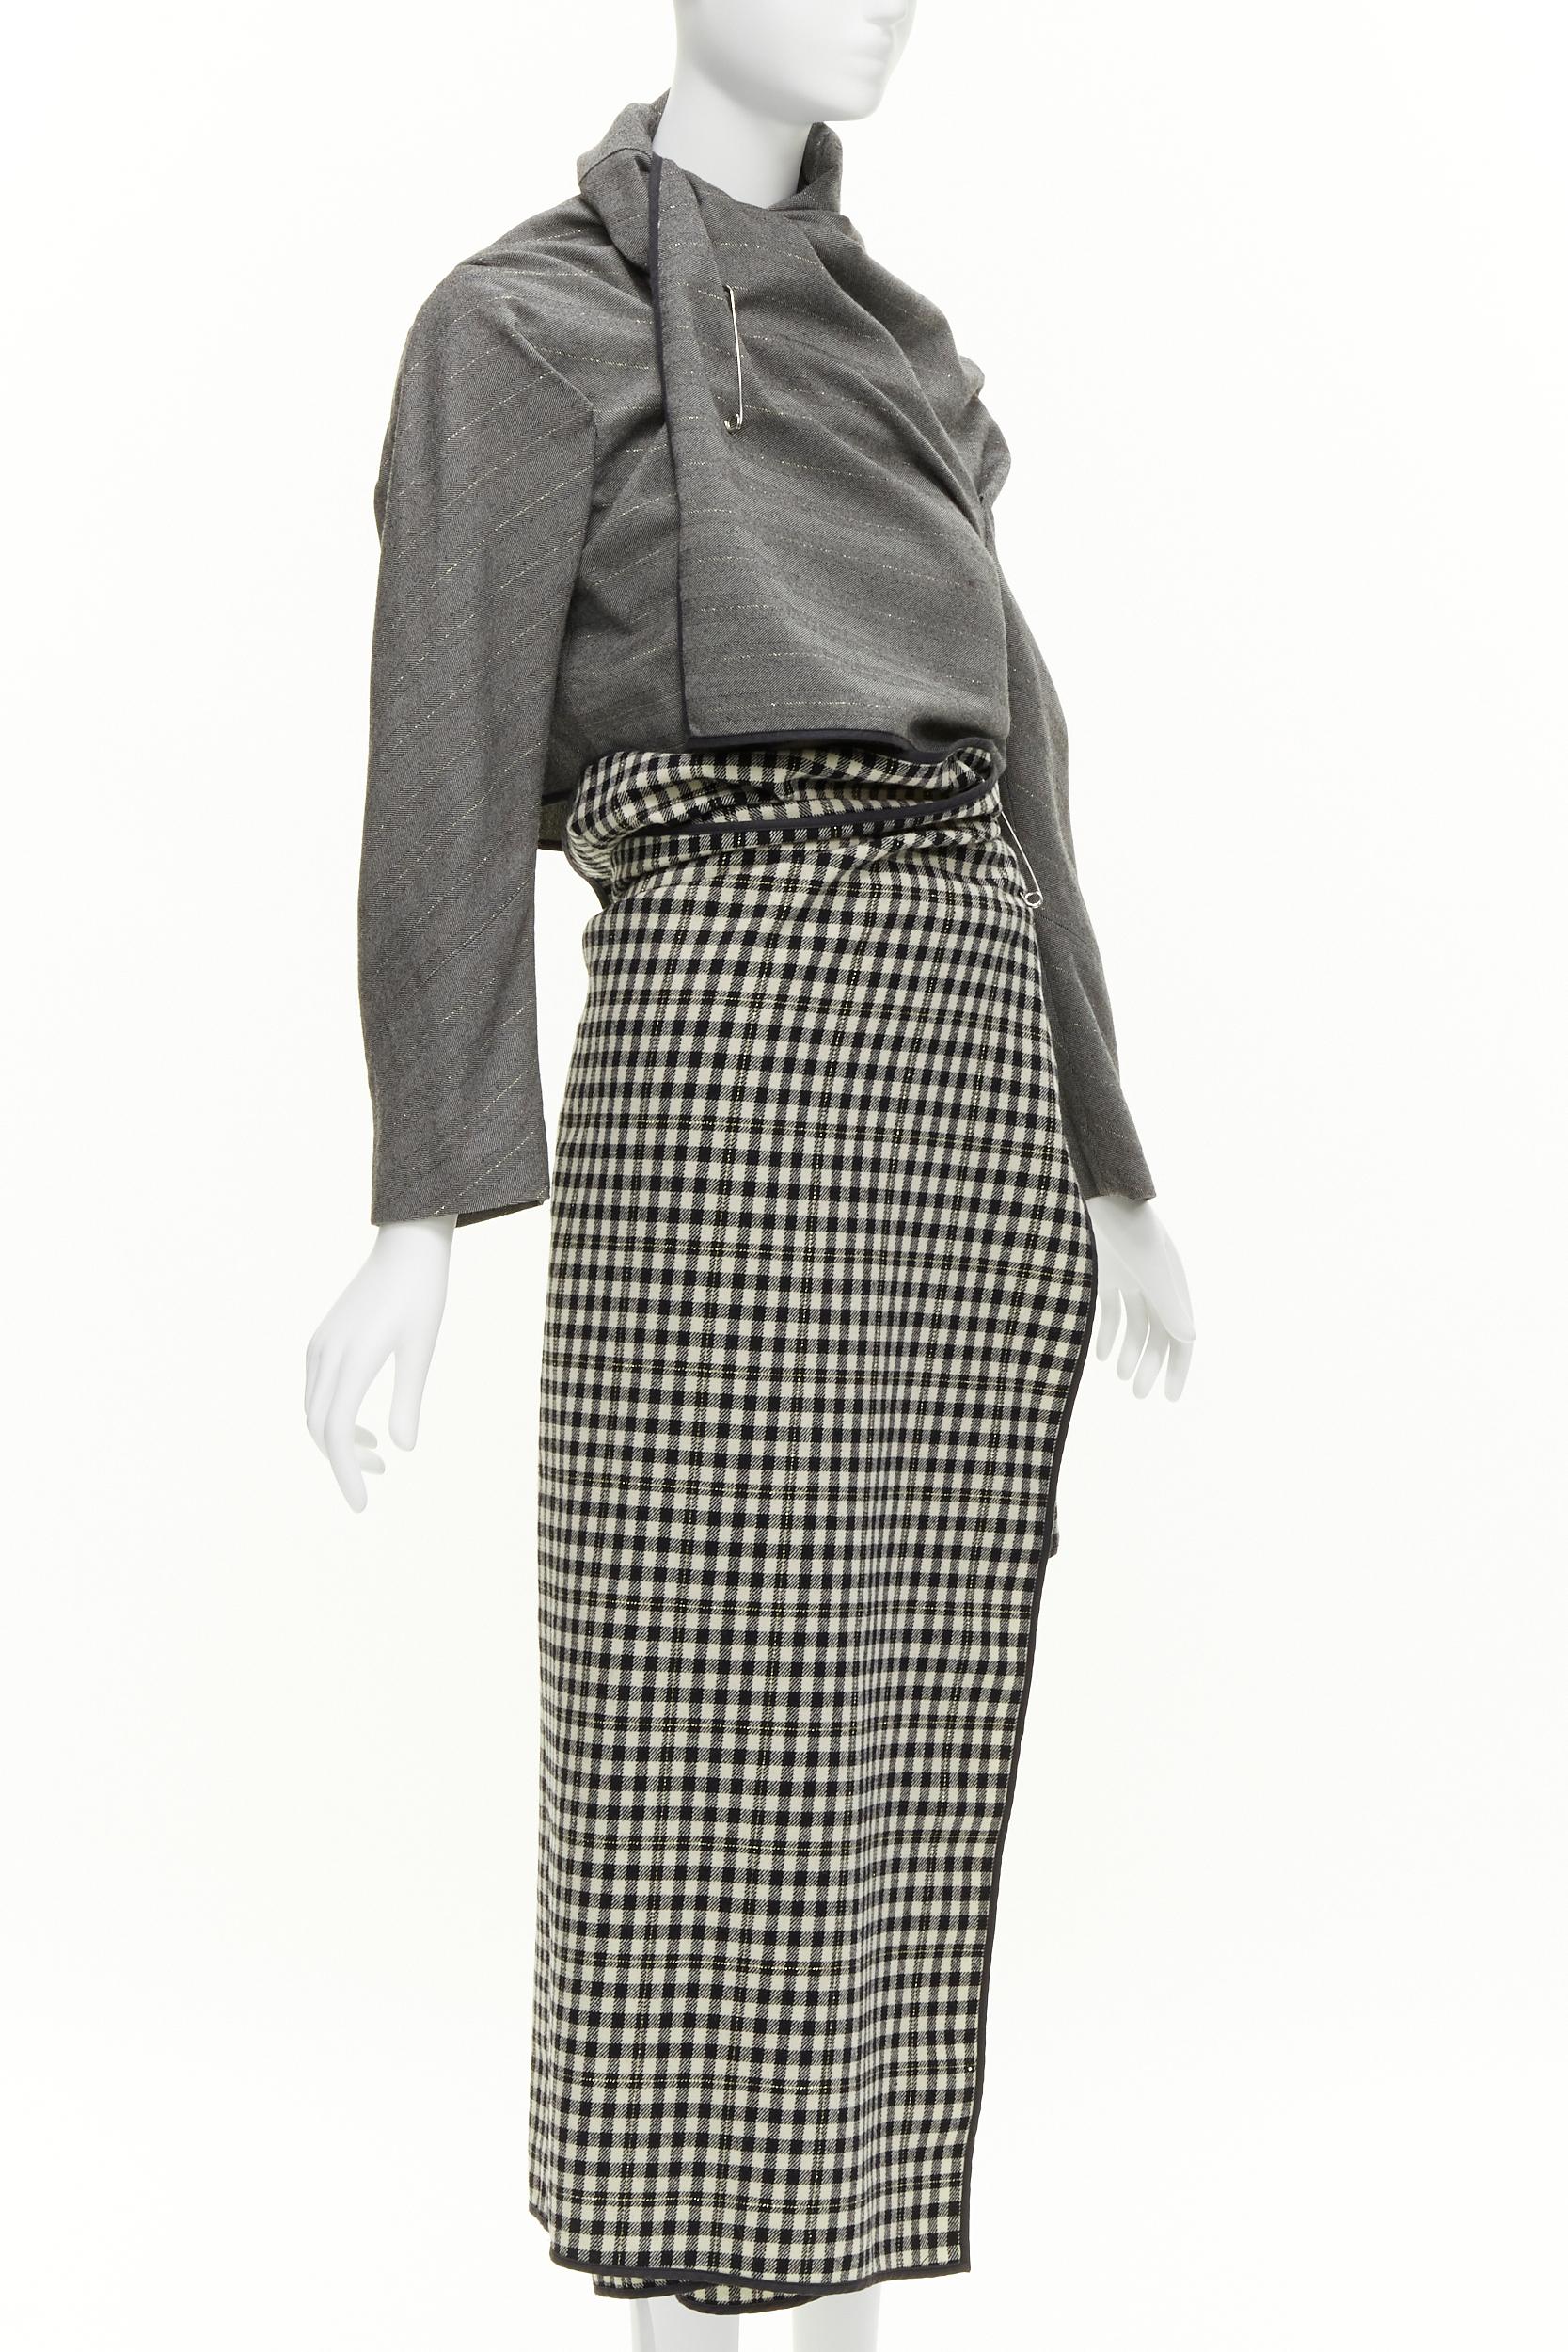 COMME DES GARCONS 1999 Vintage Runway grey wrap jacket checked skirt set
Reference: CRTI/A00701
Brand: Comme Des Garcons
Designer: Rei Kawakubo
Collection: Fall 1999 - Runway
Material: Wool, Blend
Color: Grey, Black
Pattern: Checkered
Closure: